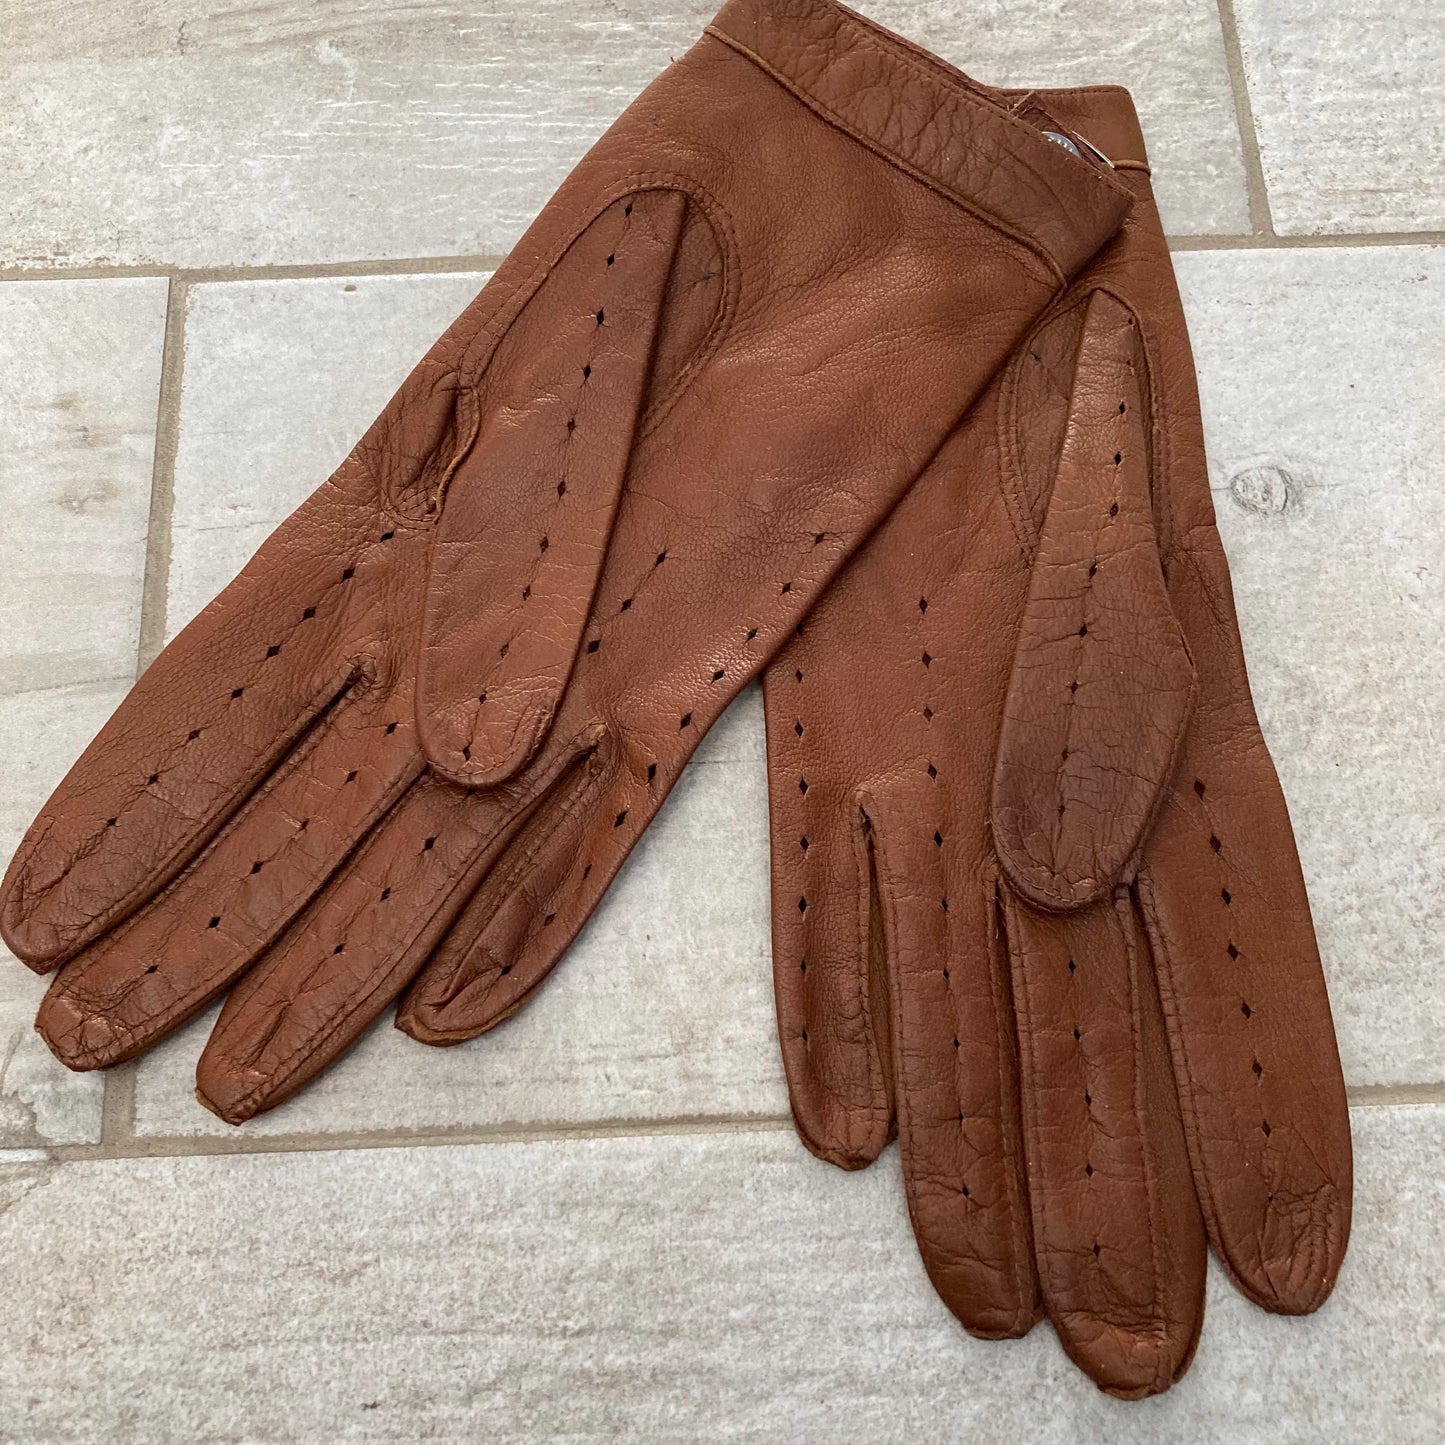 Vintage Italian Driving Gloves, Italian Leather Gloves, Size S/M